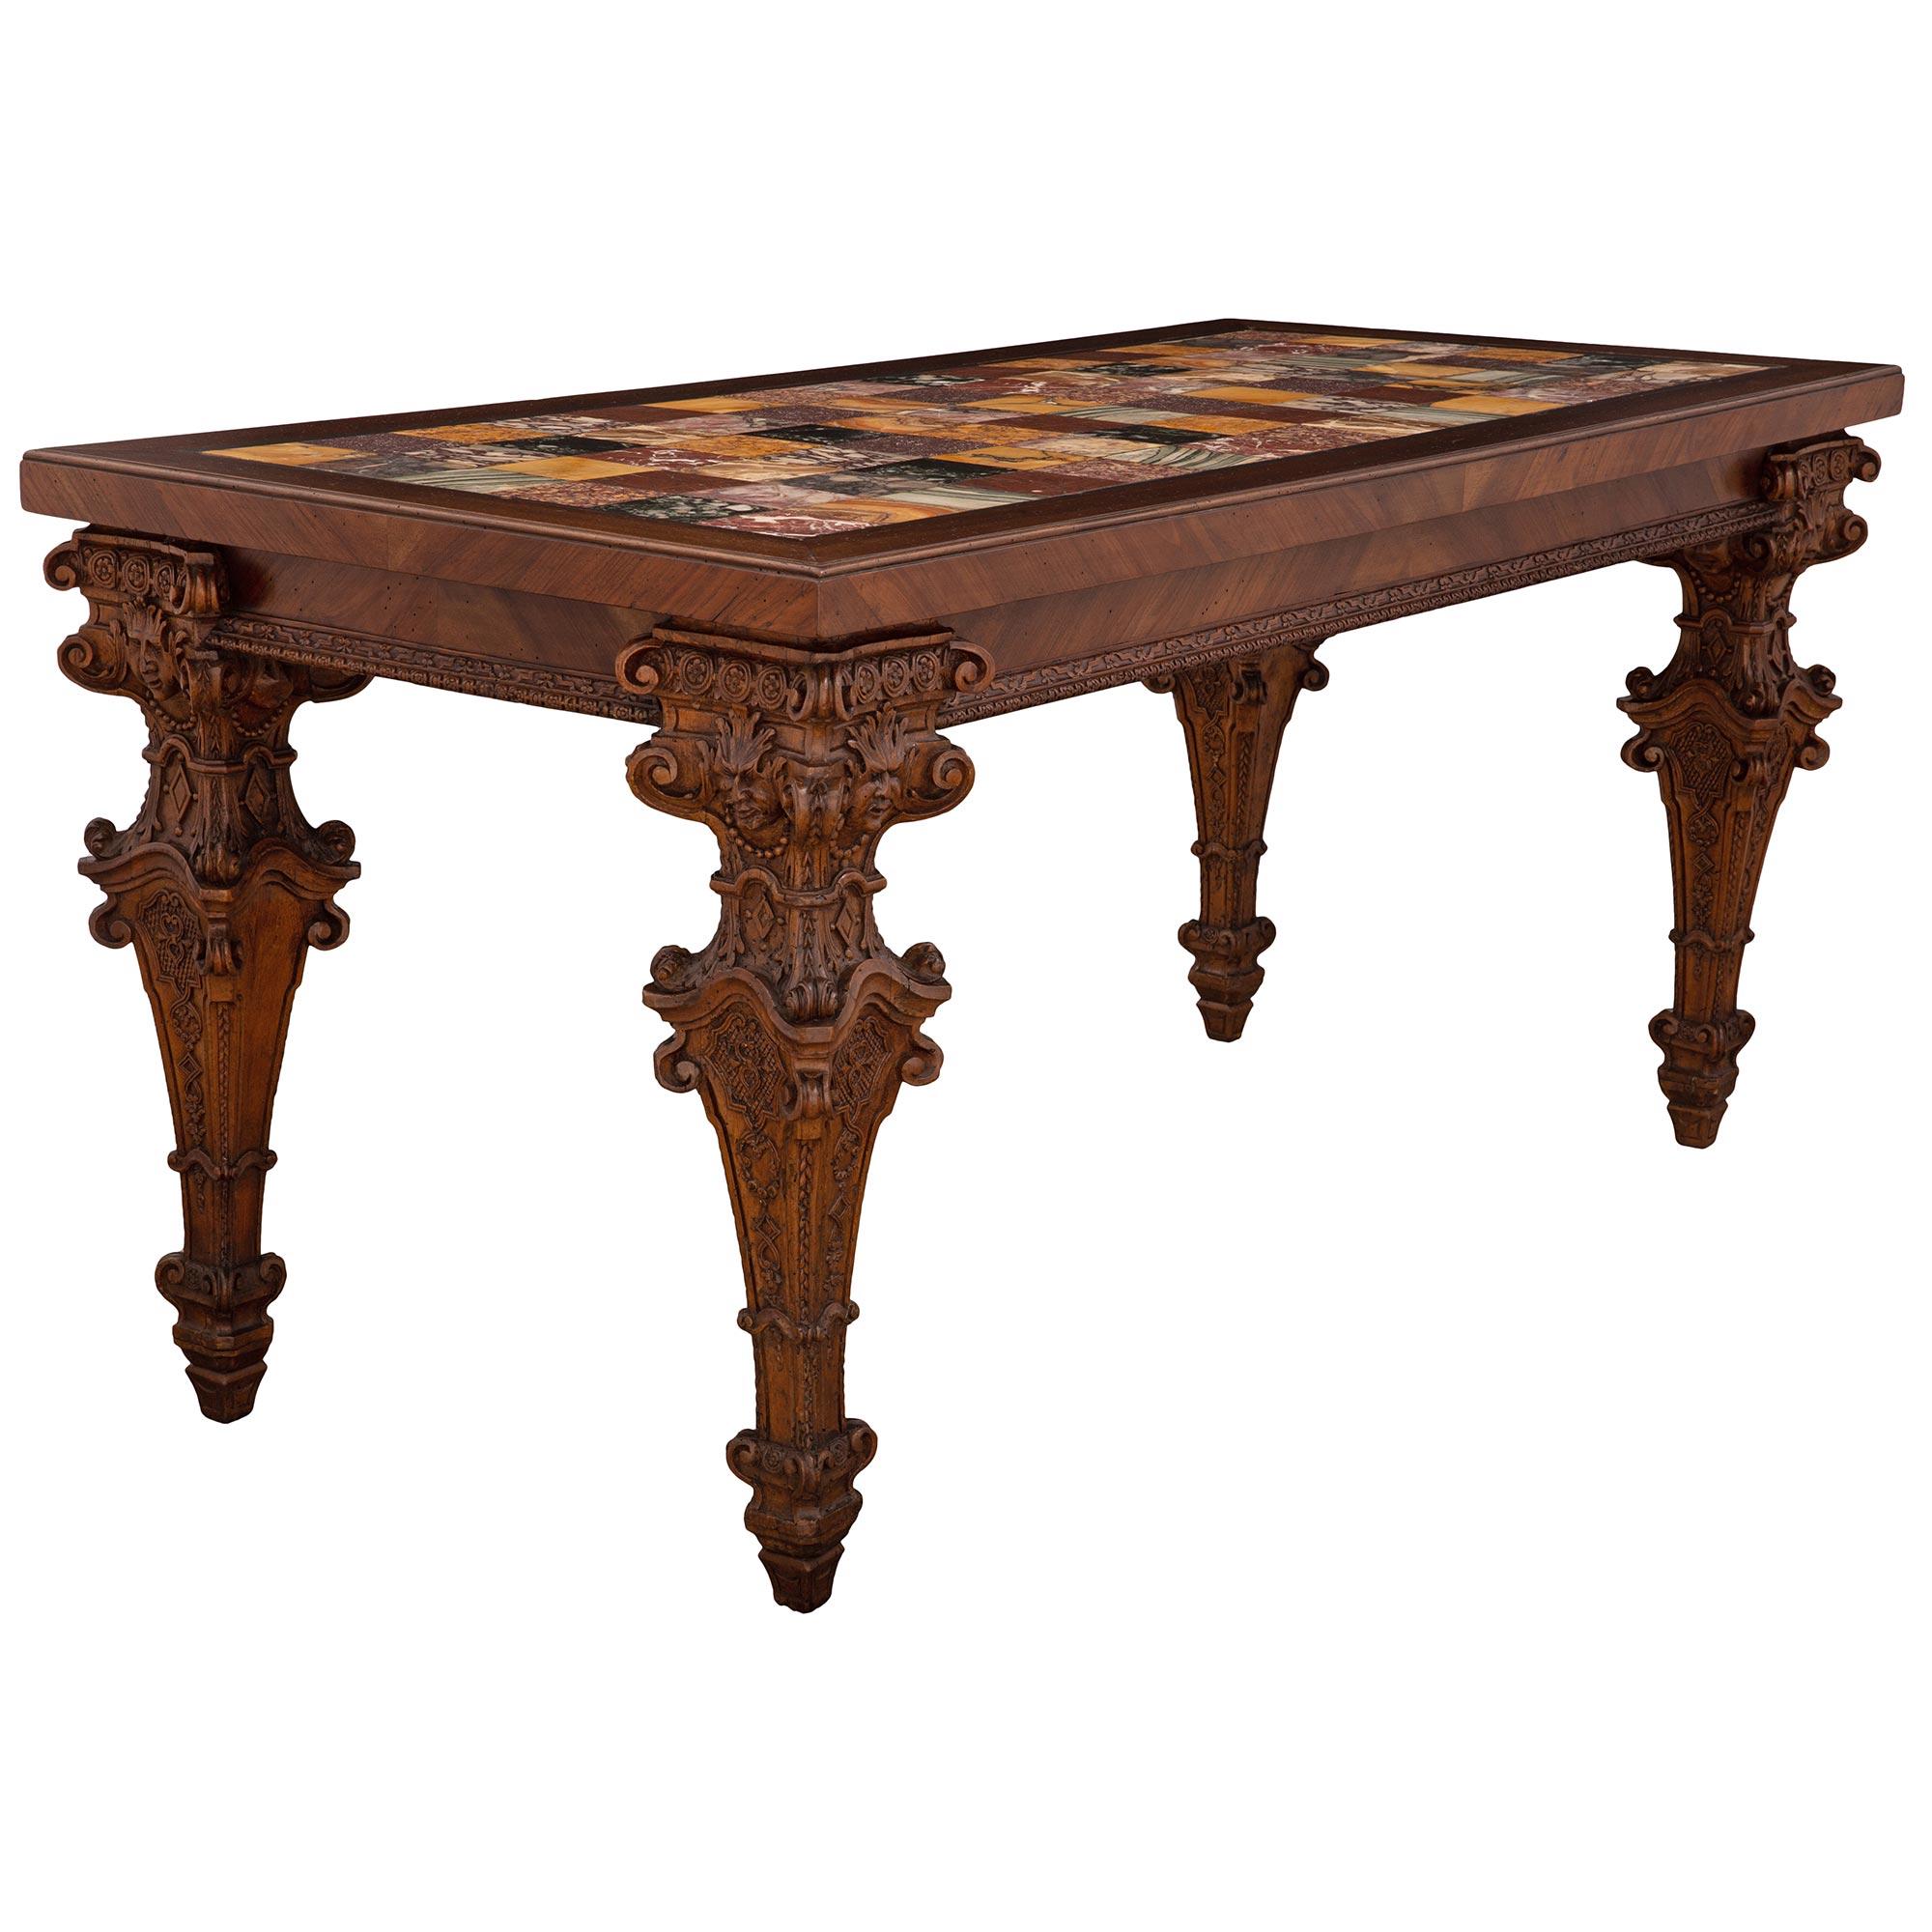 Italian 18th Century Louis XIV Style Walnut and Marble Specimen Center Table In Good Condition For Sale In West Palm Beach, FL